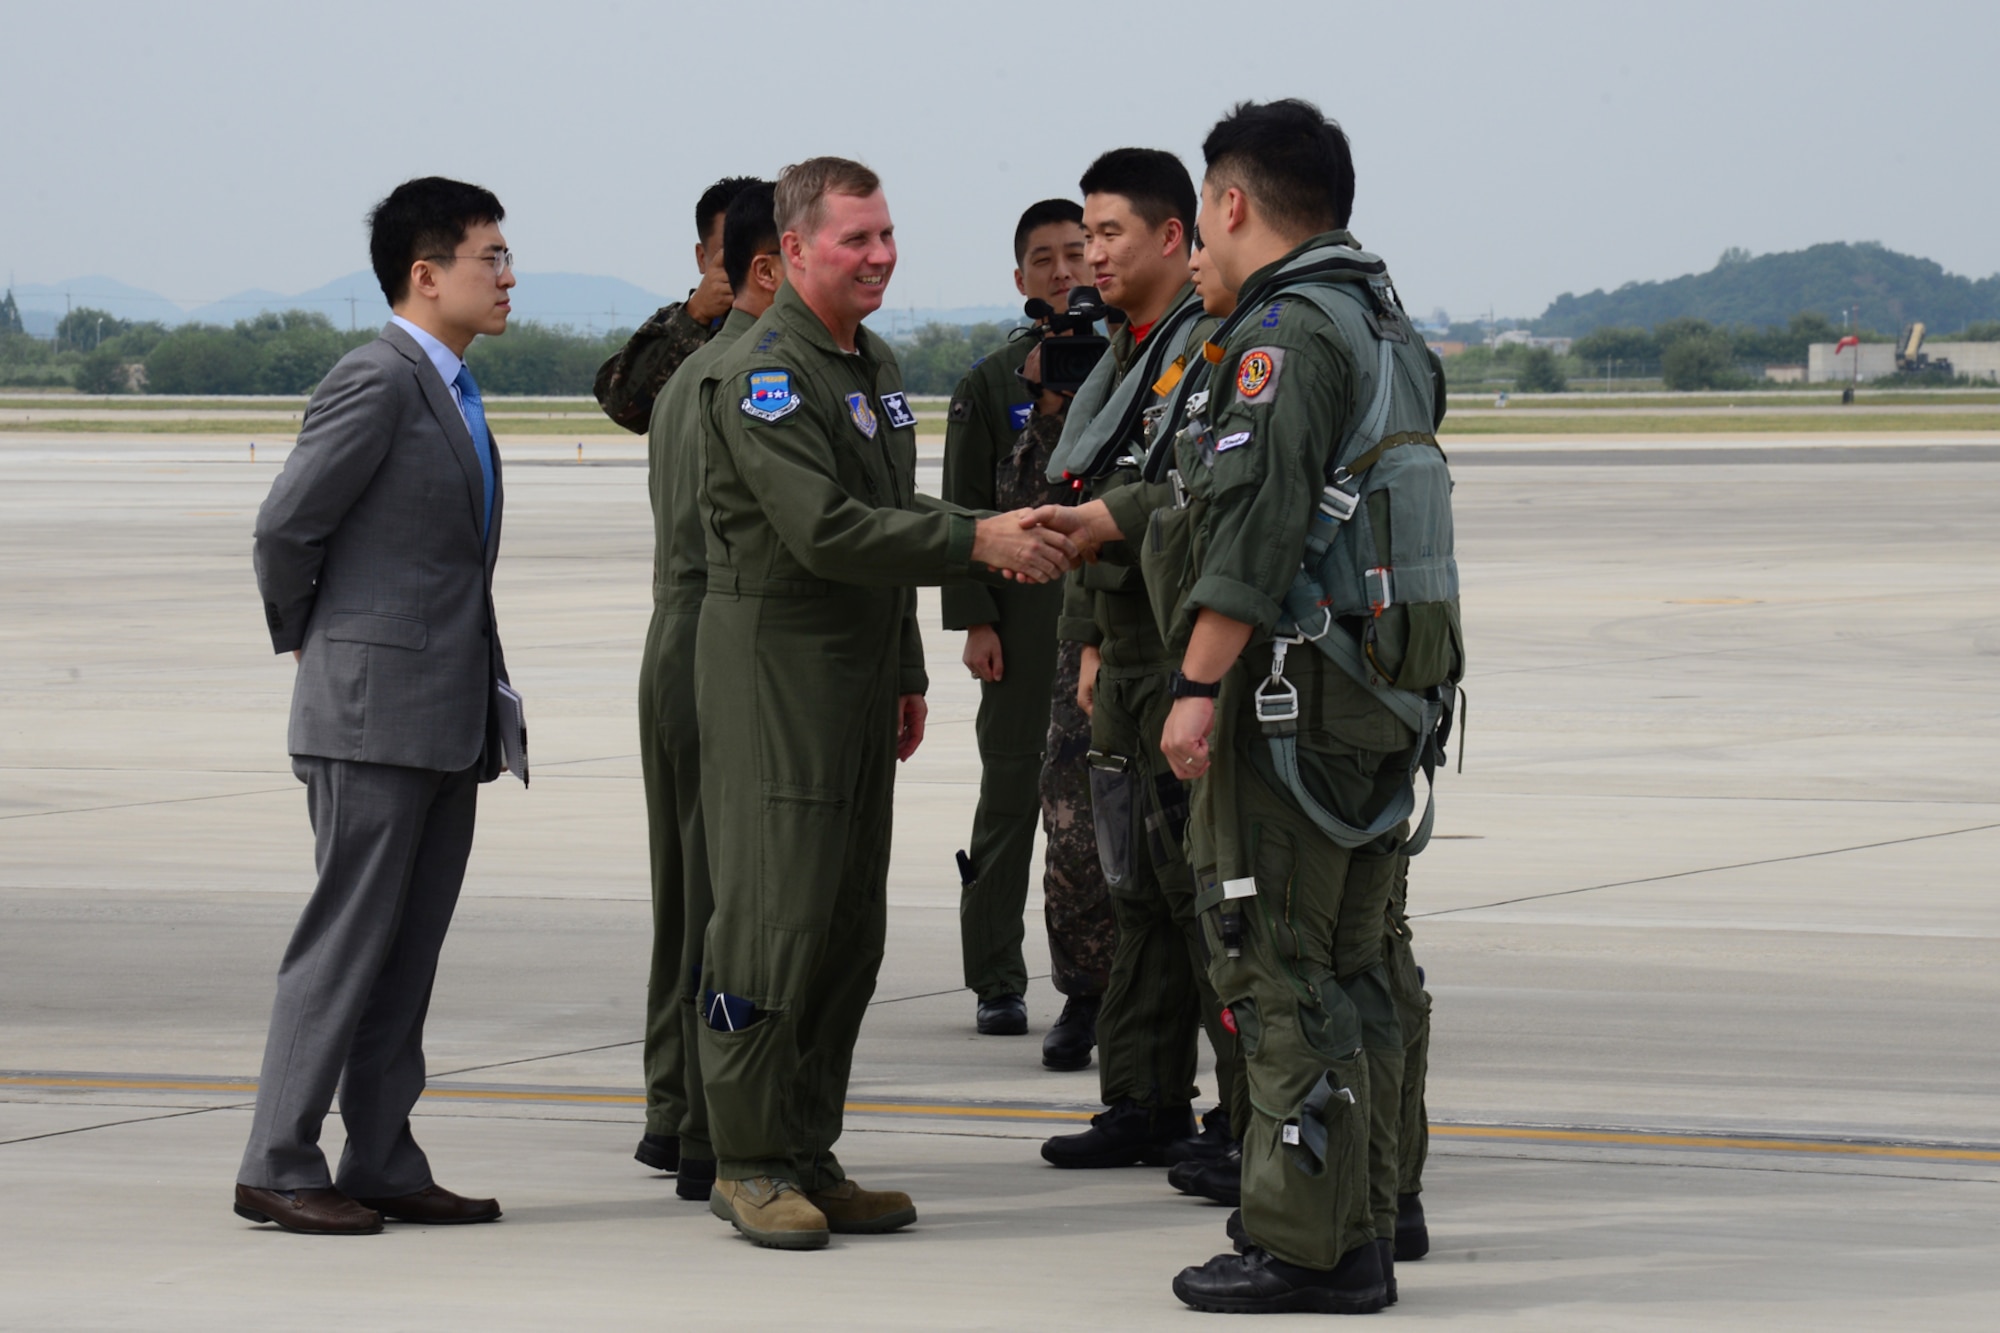 Republic of Korea F-15K Slam Eagle pilots are greeted by U.S. Air Force Lt. Gen. Thomas W. Bergeson, 7th Air Force Commander, following a landing of the B1-B Lancer at Osan Air Base, Republic of Korea, Sept. 21, 2016. ROKAF F-15s and U.S. Air Force F-16 Fighting Falcons escorted the B1-B, which is deployed from Andersen Air Base, Guam, over Osan before landing. The flight was the closest a B-1 has ever flown to the border between the Republic of Korea and North Korea. (U.S. Air Force photo by Staff Sgt. Rachelle Coleman)